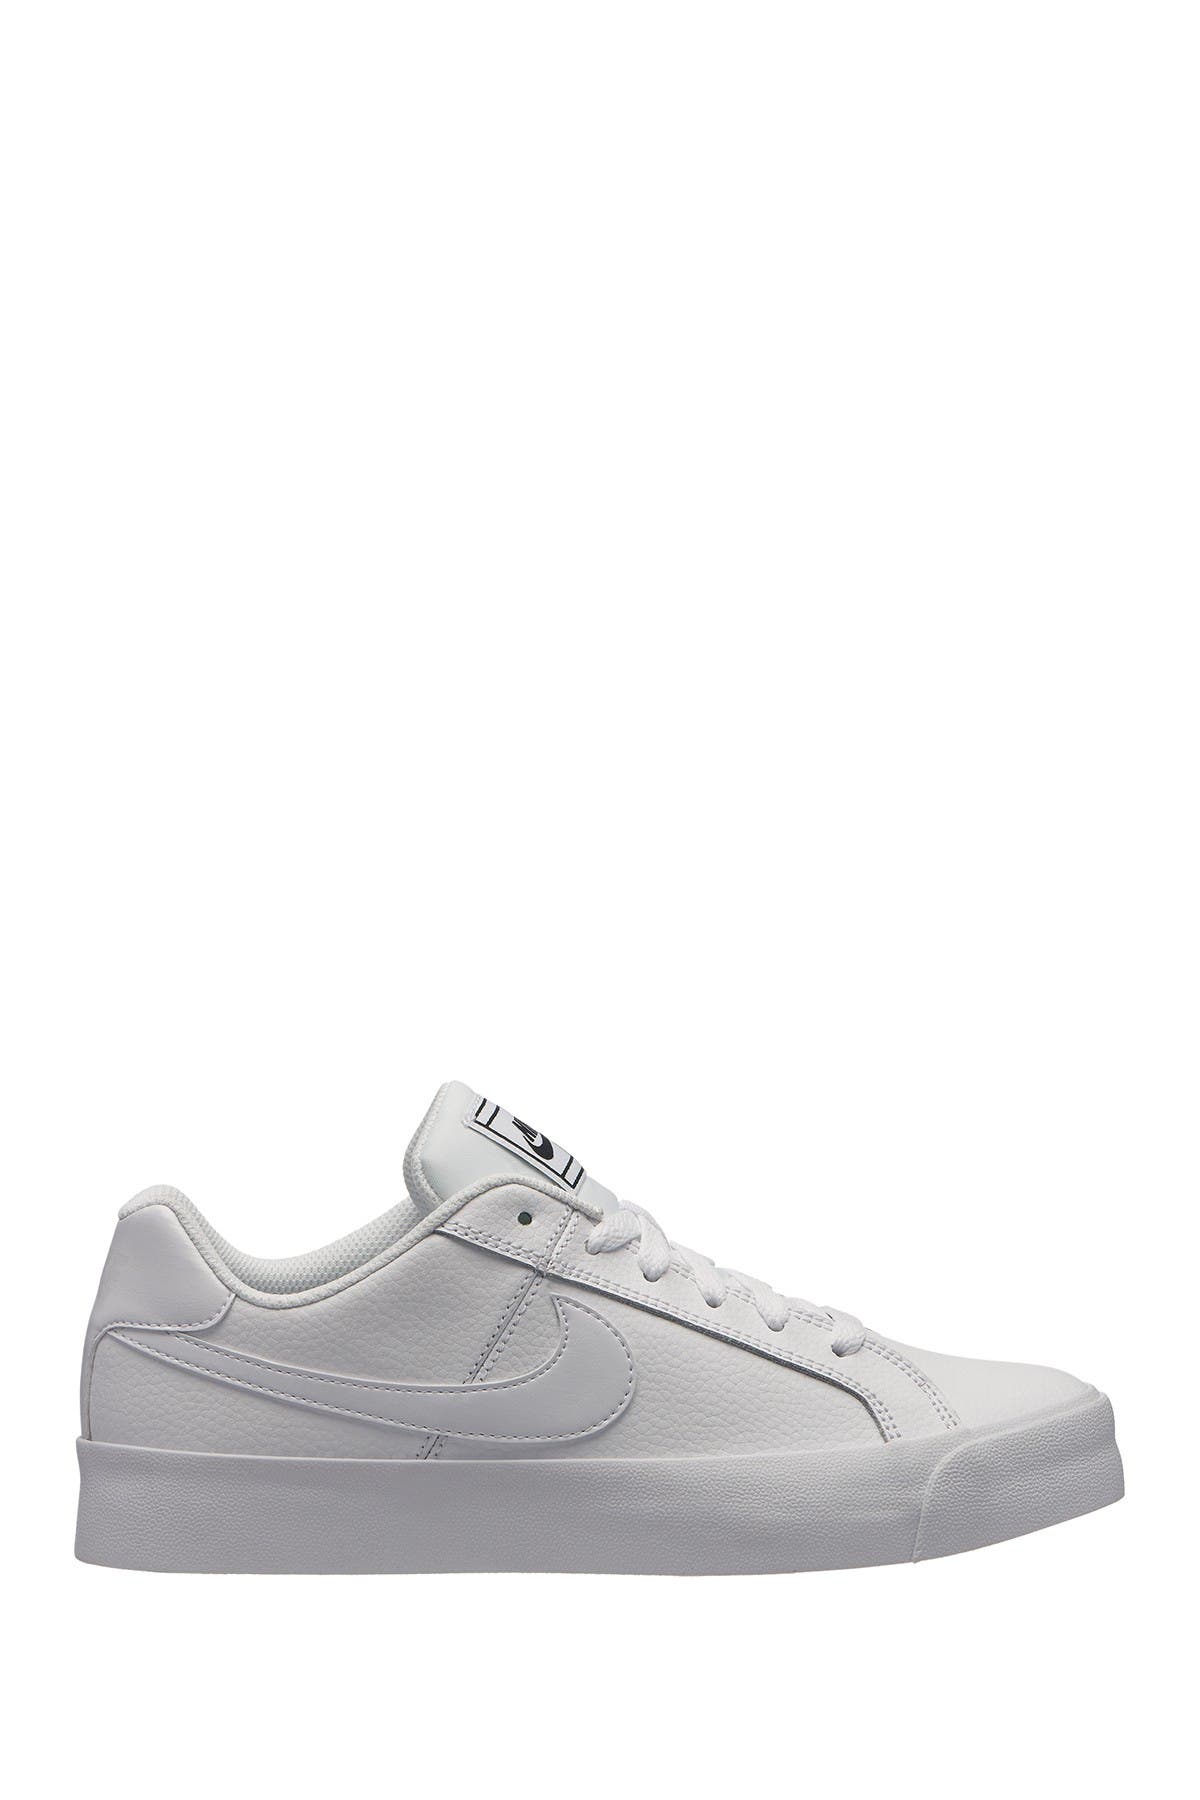 court royale ac sneakers